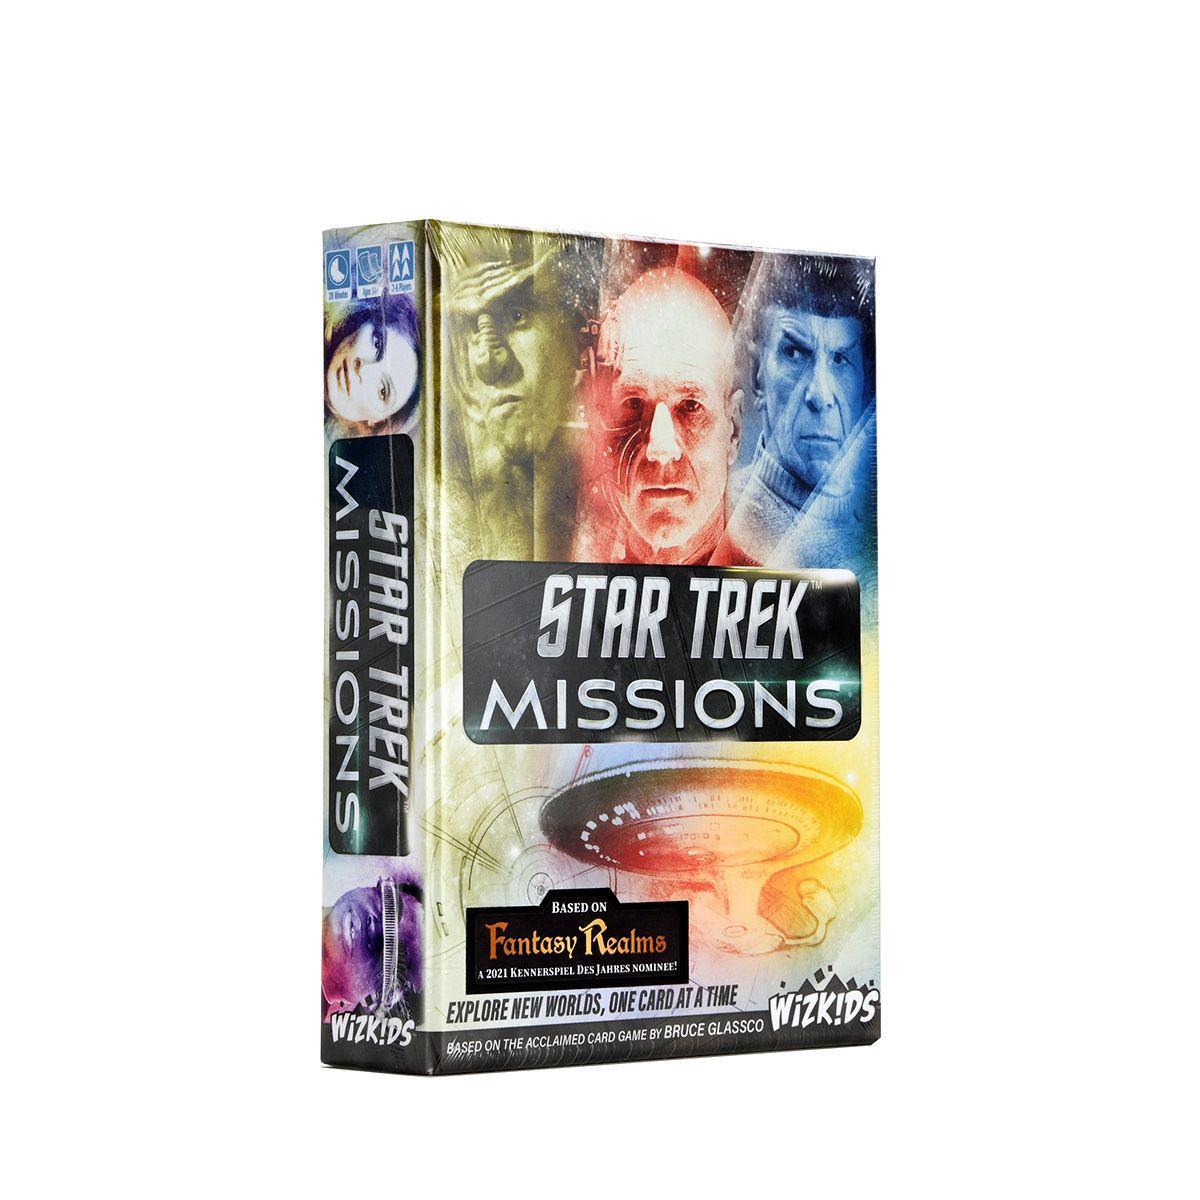 Star Trek: Missions - A Fantasy Realms Game - Gaming Library